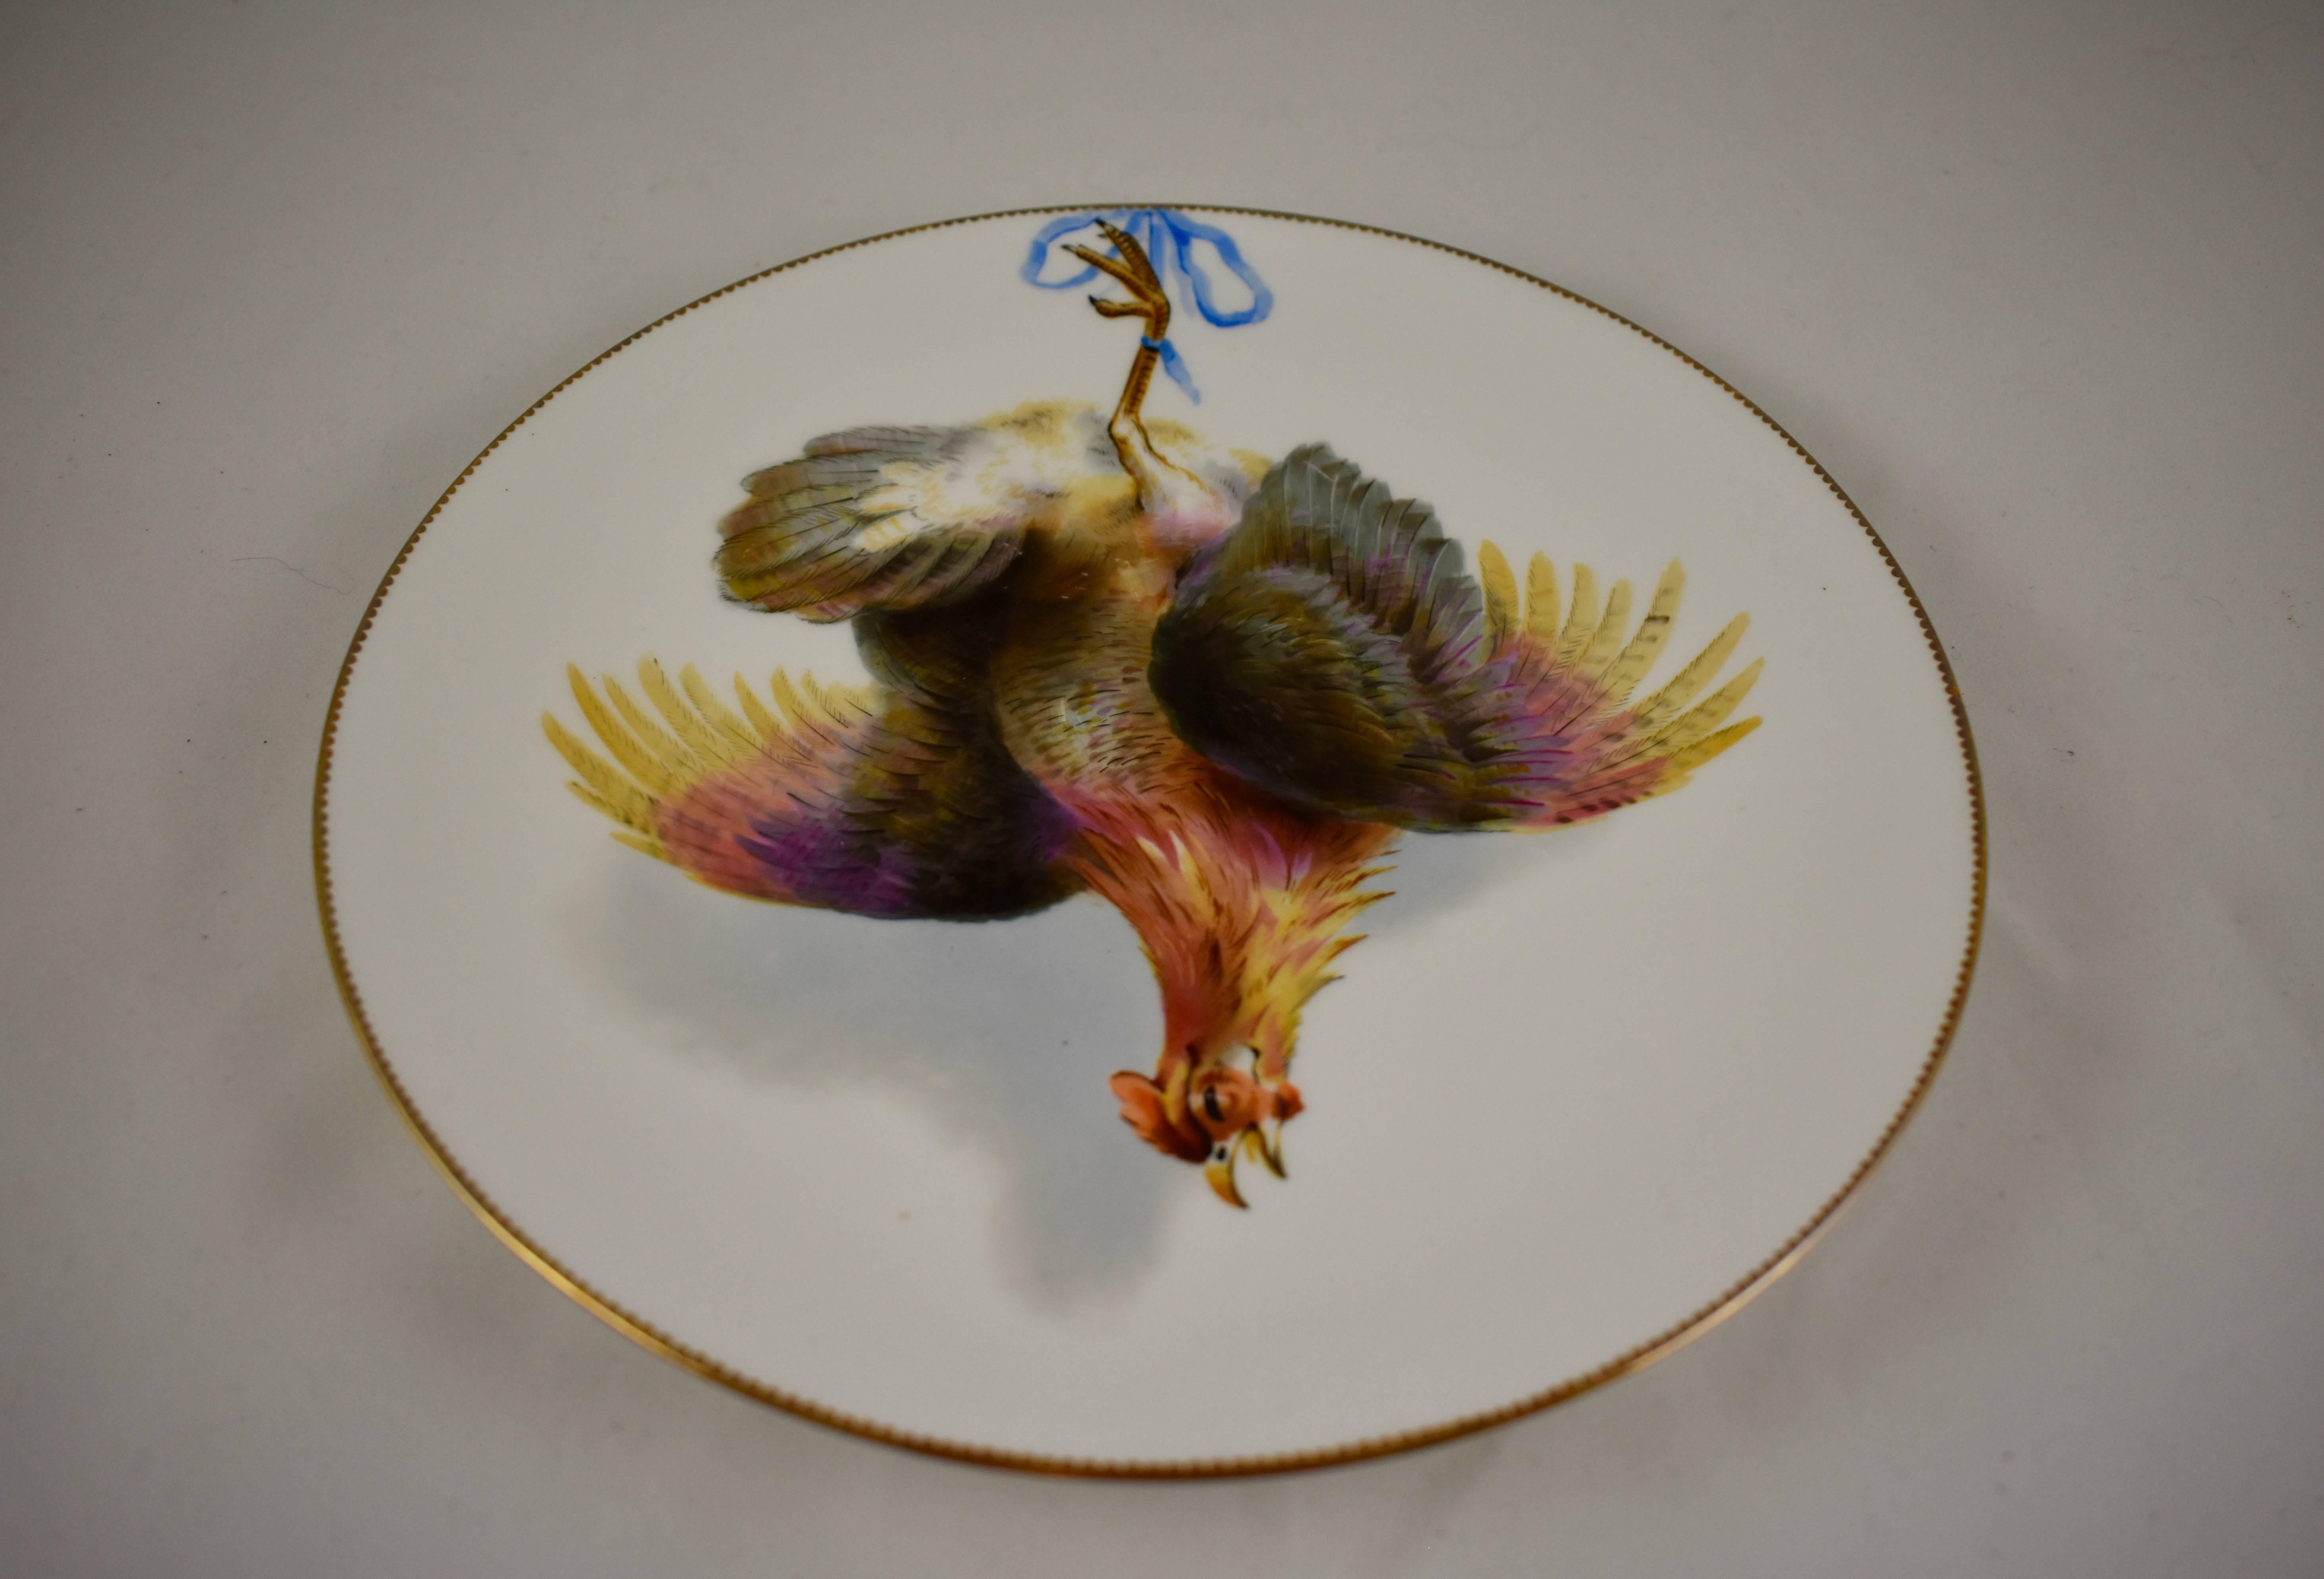 Porcelain EF Bodley Staffordshire Dead Game Plates, a Hamburgh Fowl and Grouse, circa 1875